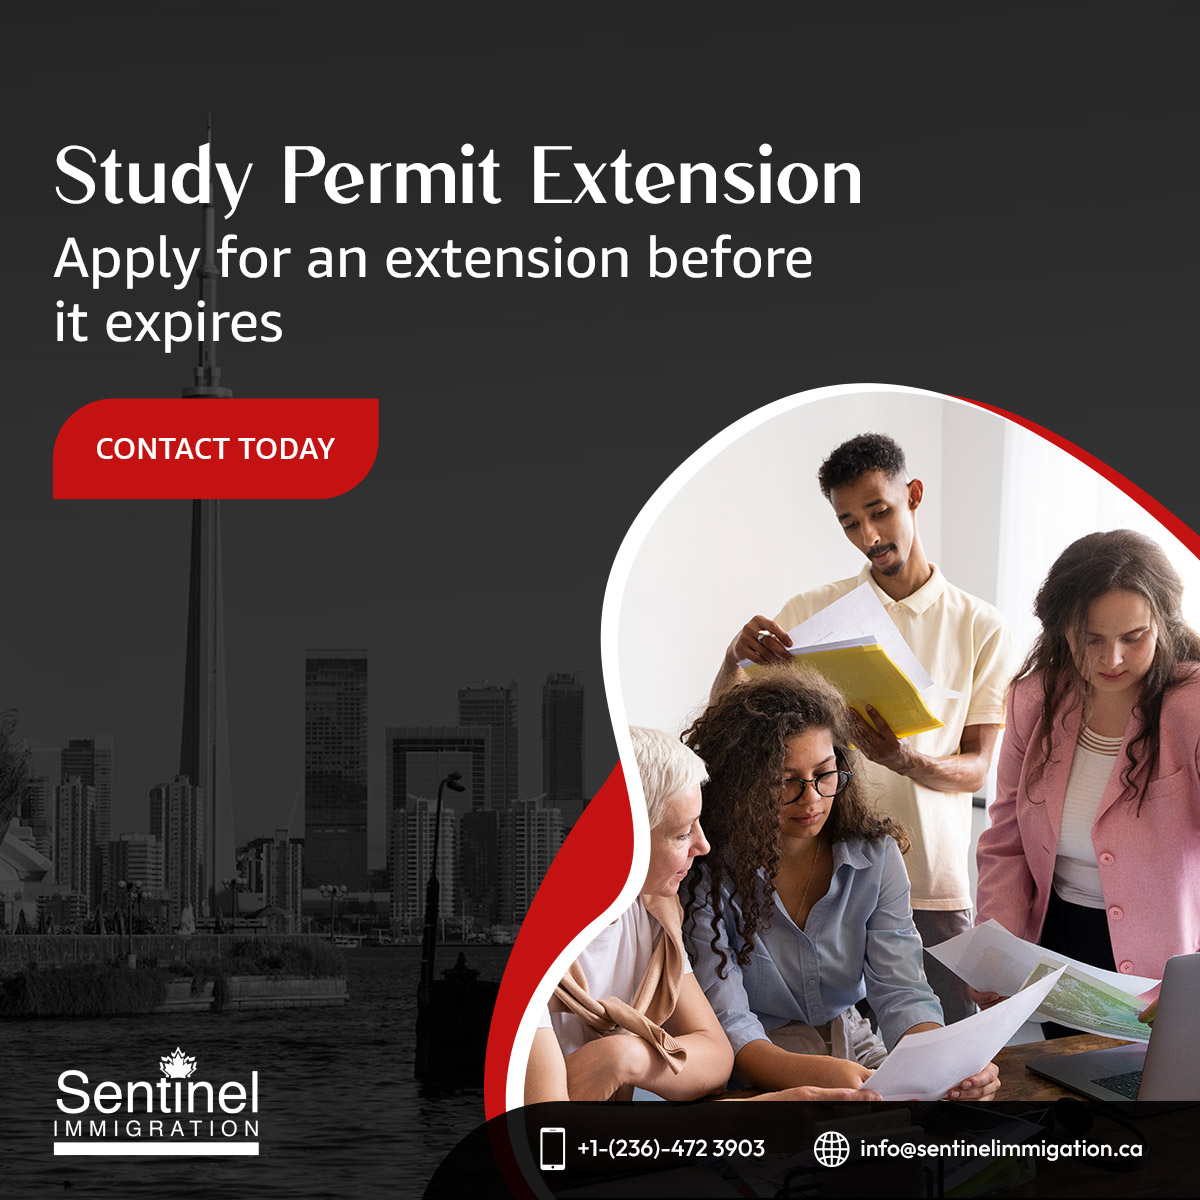 Unlock new horizons and extend your educational journey in Canada! Ensure a seamless transition by applying for your Study Permit Extension before it expires
.
.
#studypermitcanada #studypermitapproval #academicgrowth #sentinelimmigration #immigrationservices #immigration #canada